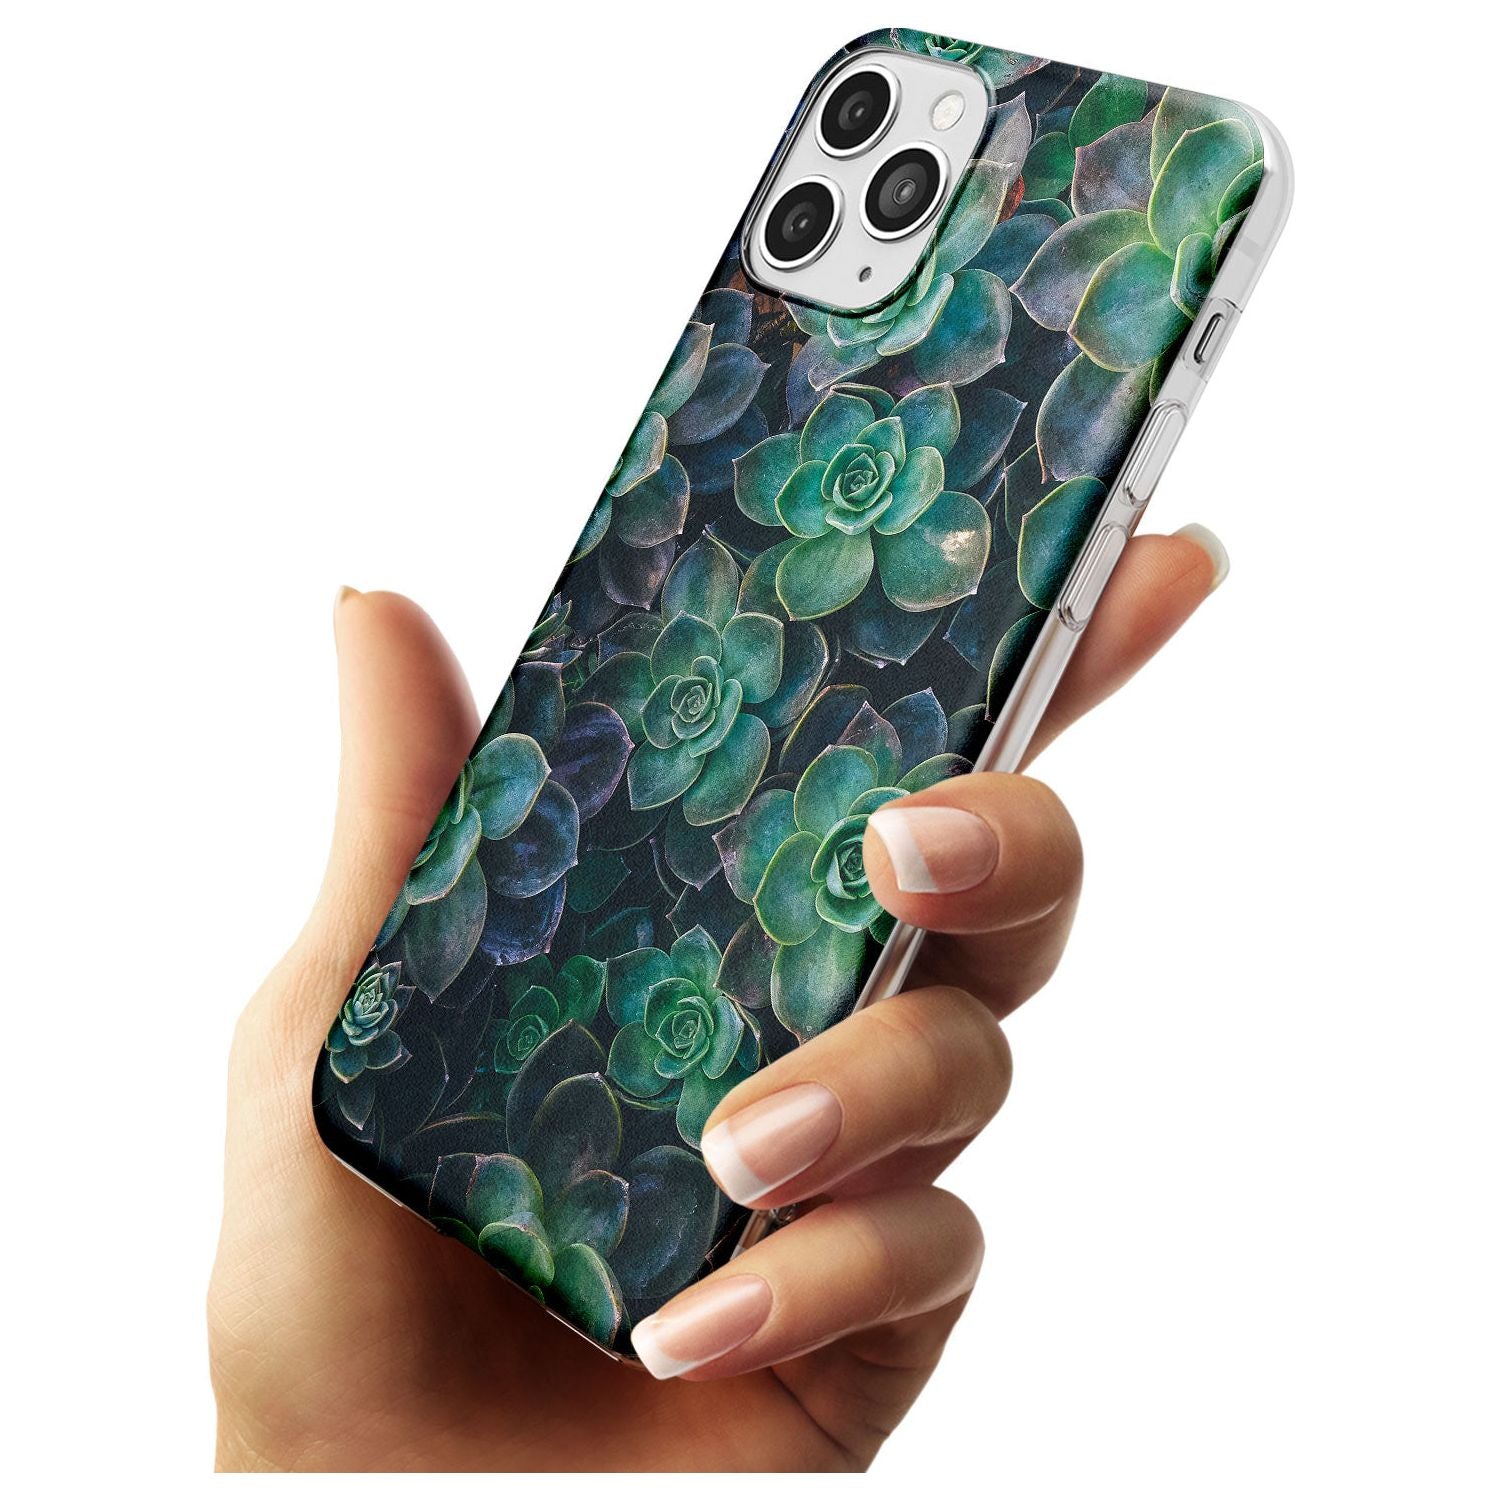 Succulents - Real Botanical Photographs Slim TPU Phone Case for iPhone 11 Pro Max